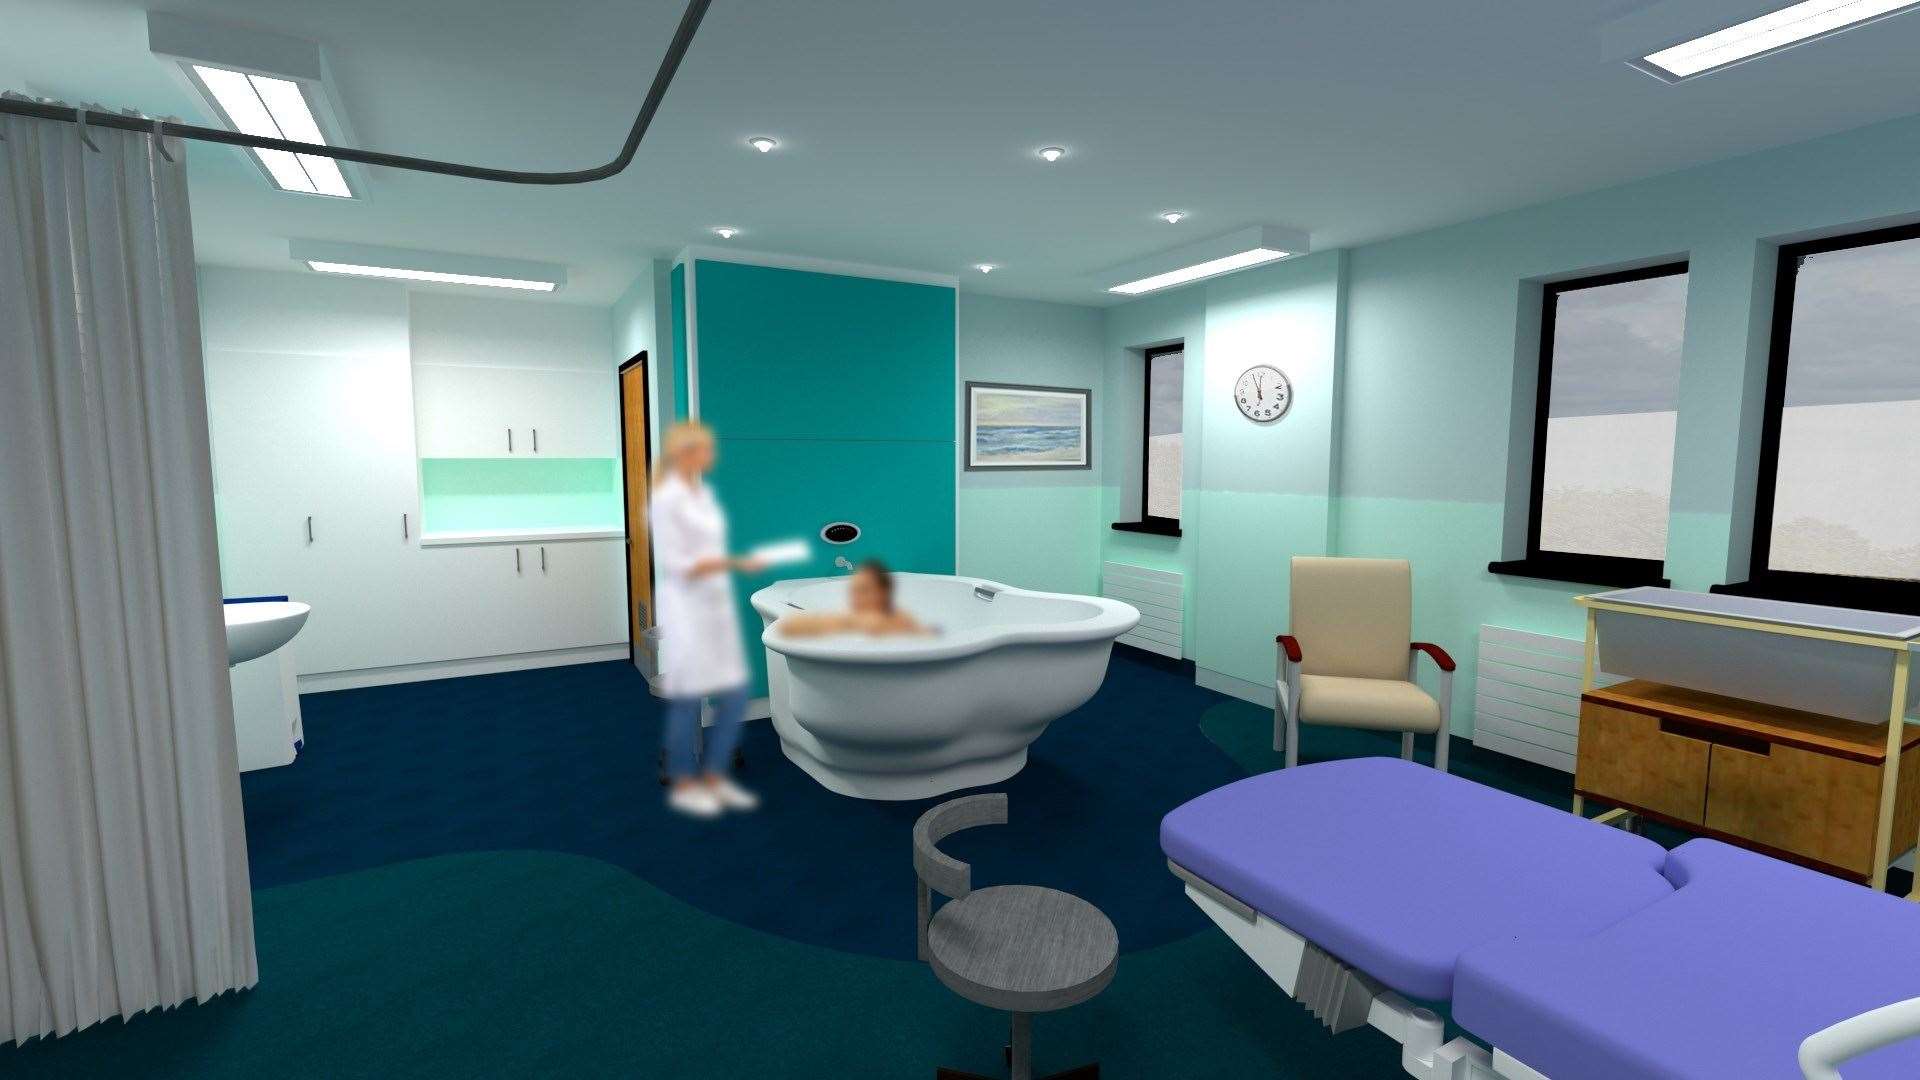 The new birthing pool facility at Dr Gray's is set to look like this.